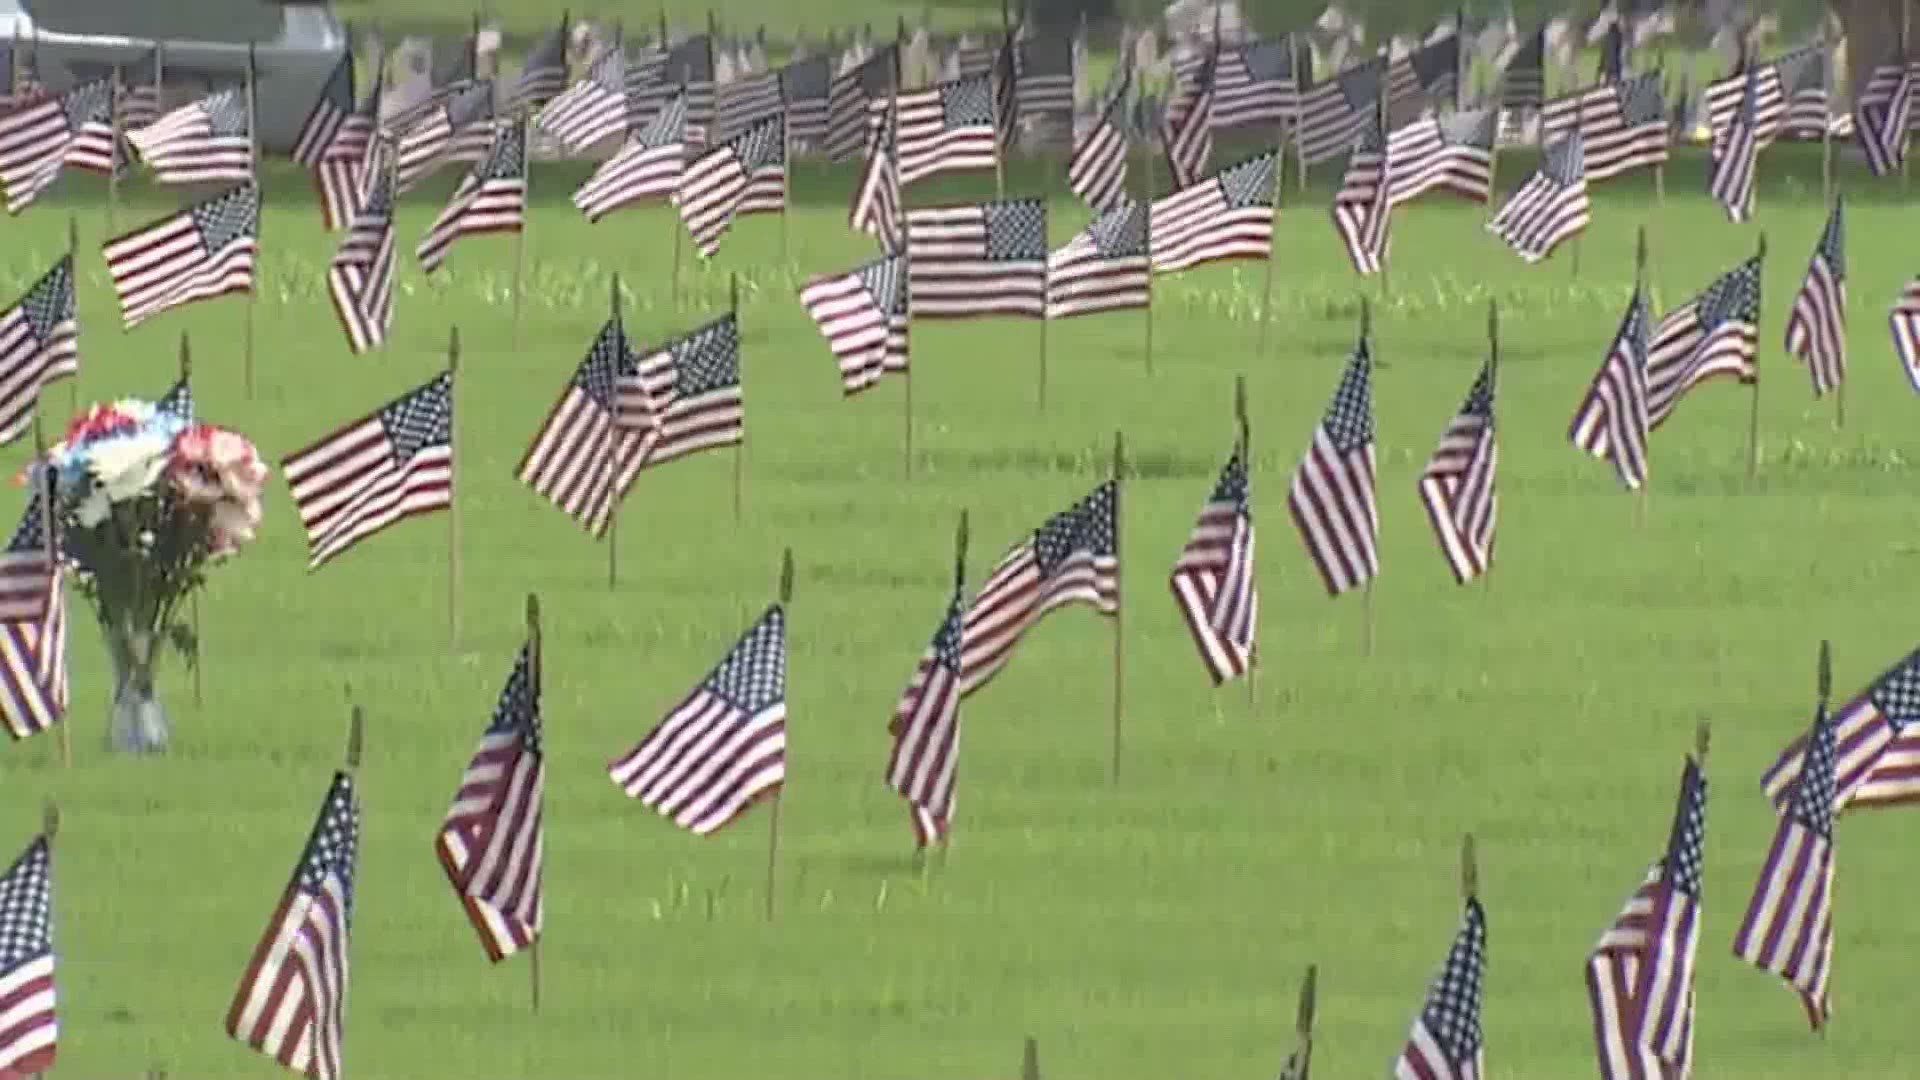 Flags were placed on the graves of more than 100,000 veterans buried at Houston National Cemetery in honor of Memorial Day.